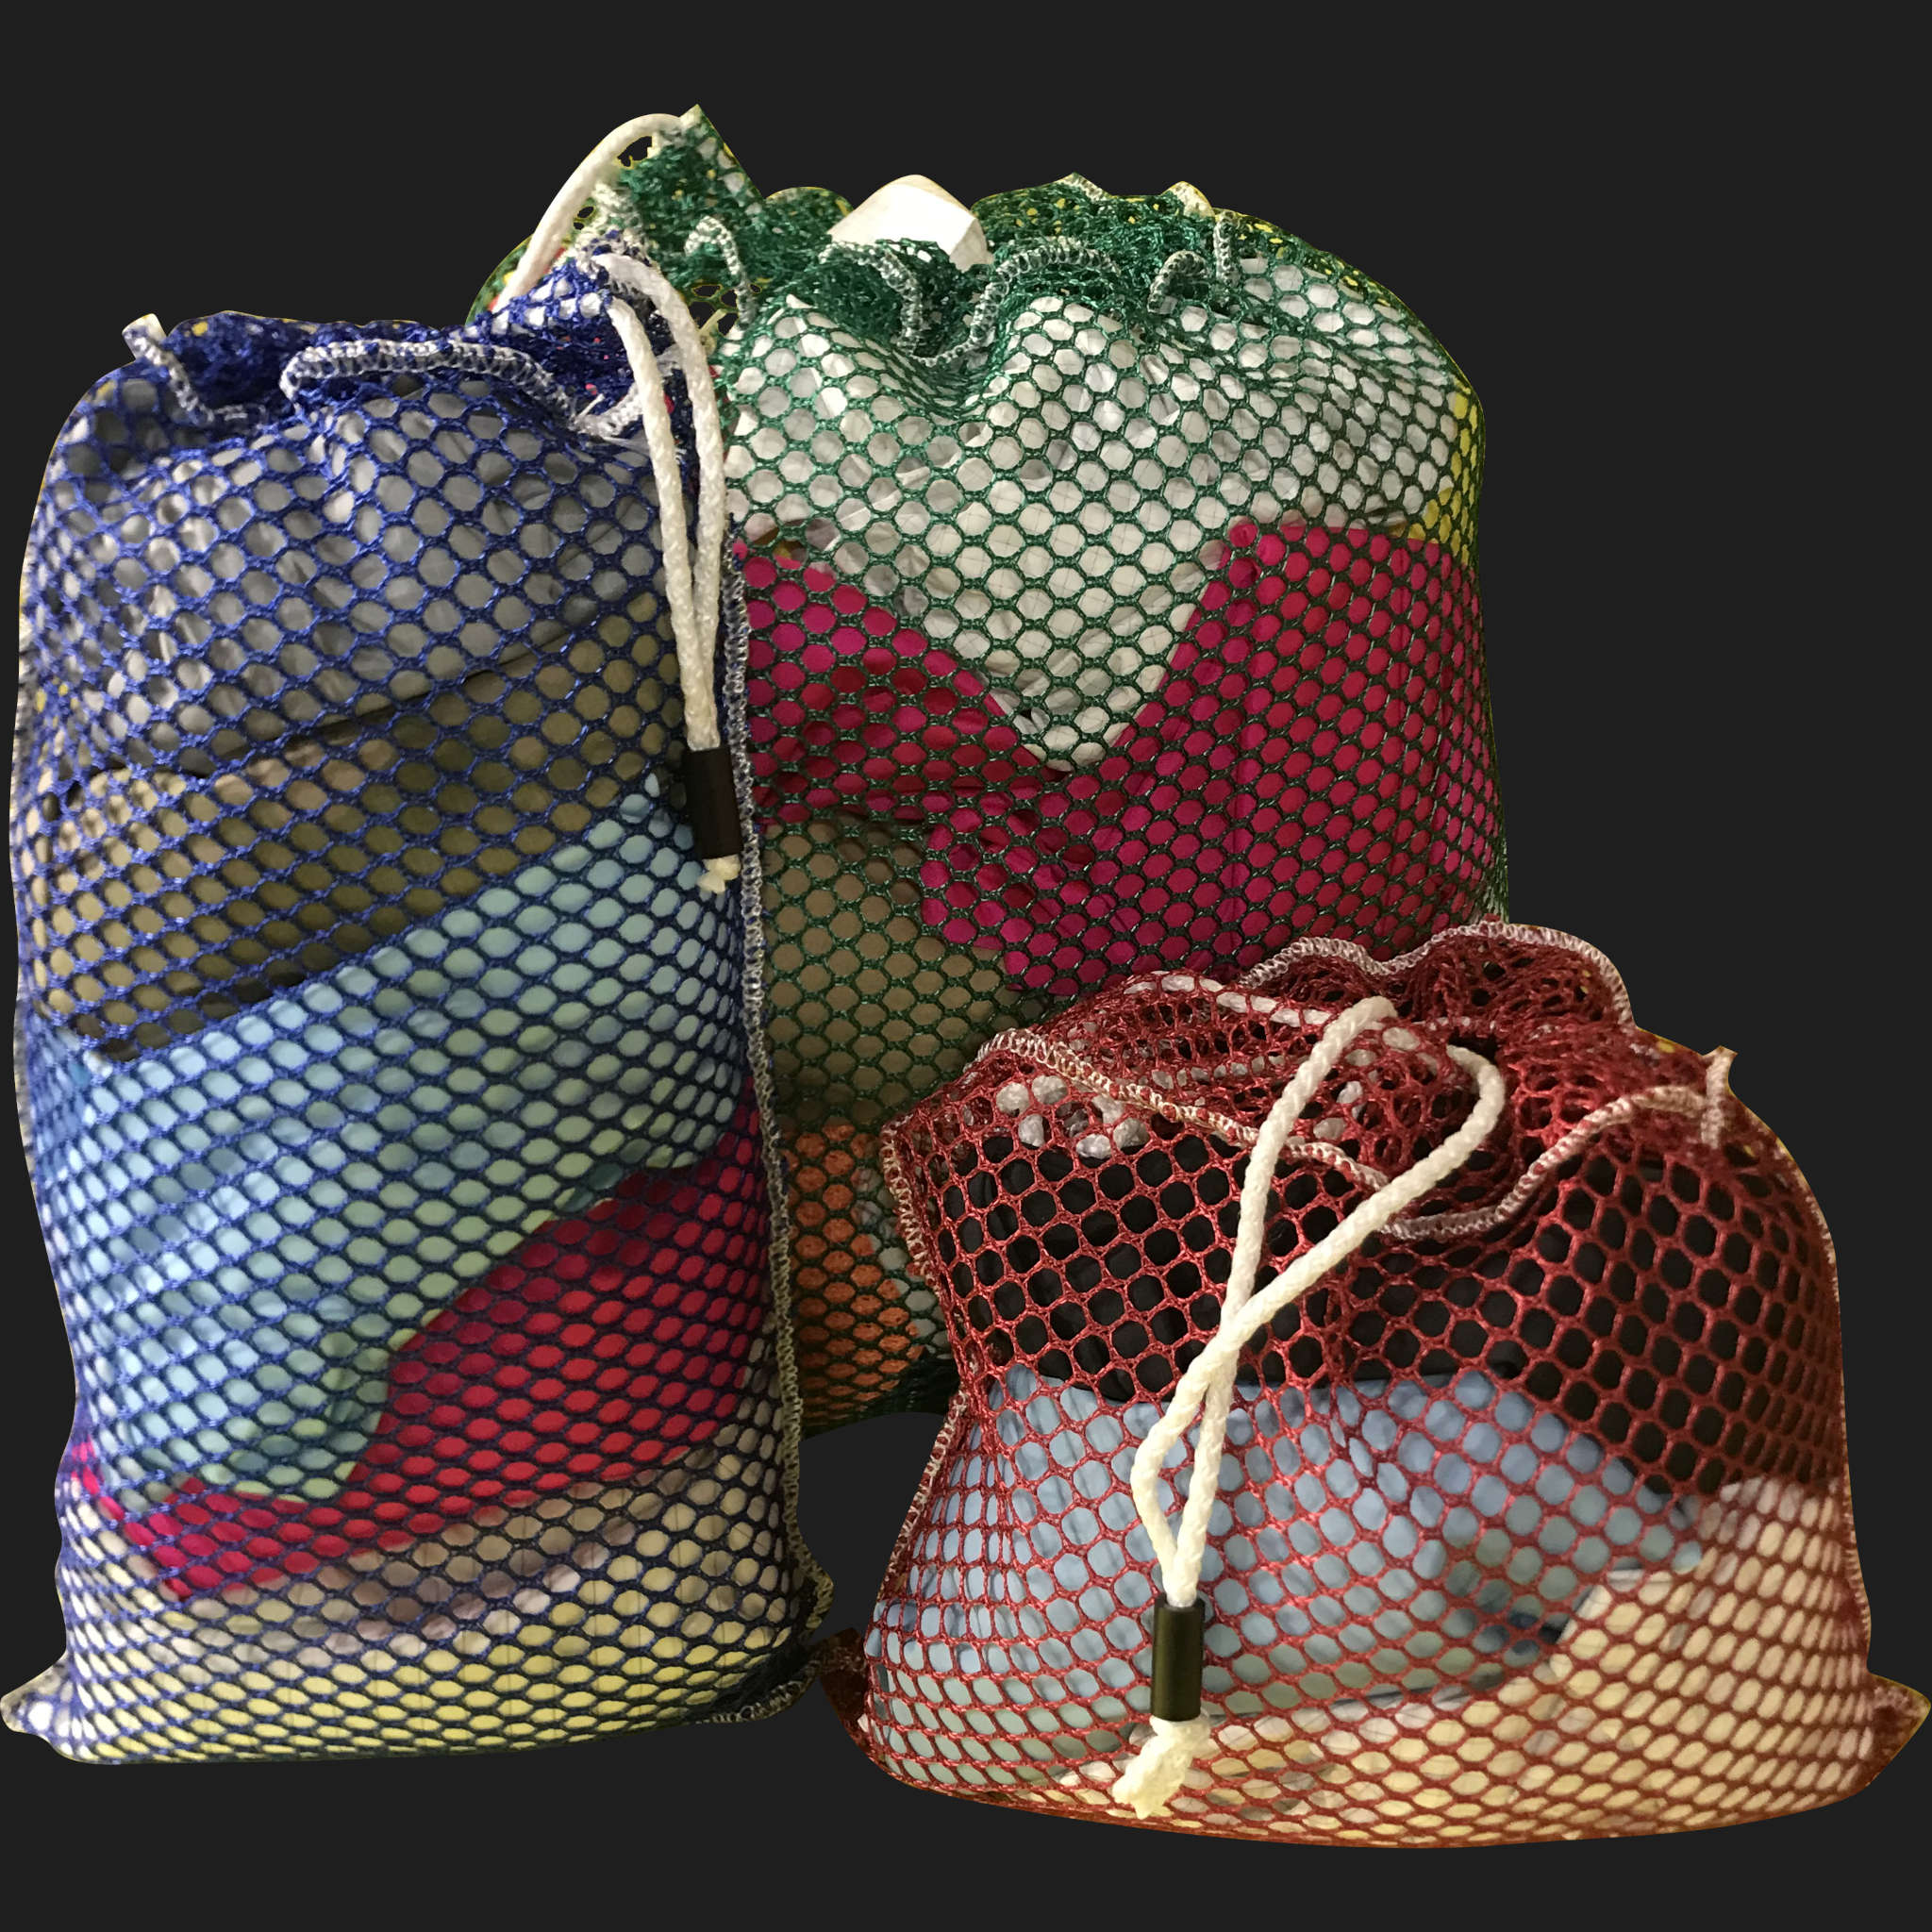 52" x 60" Customized Mesh-Net-Laundry Bags Heavy Duty with Cord and barrellock closure